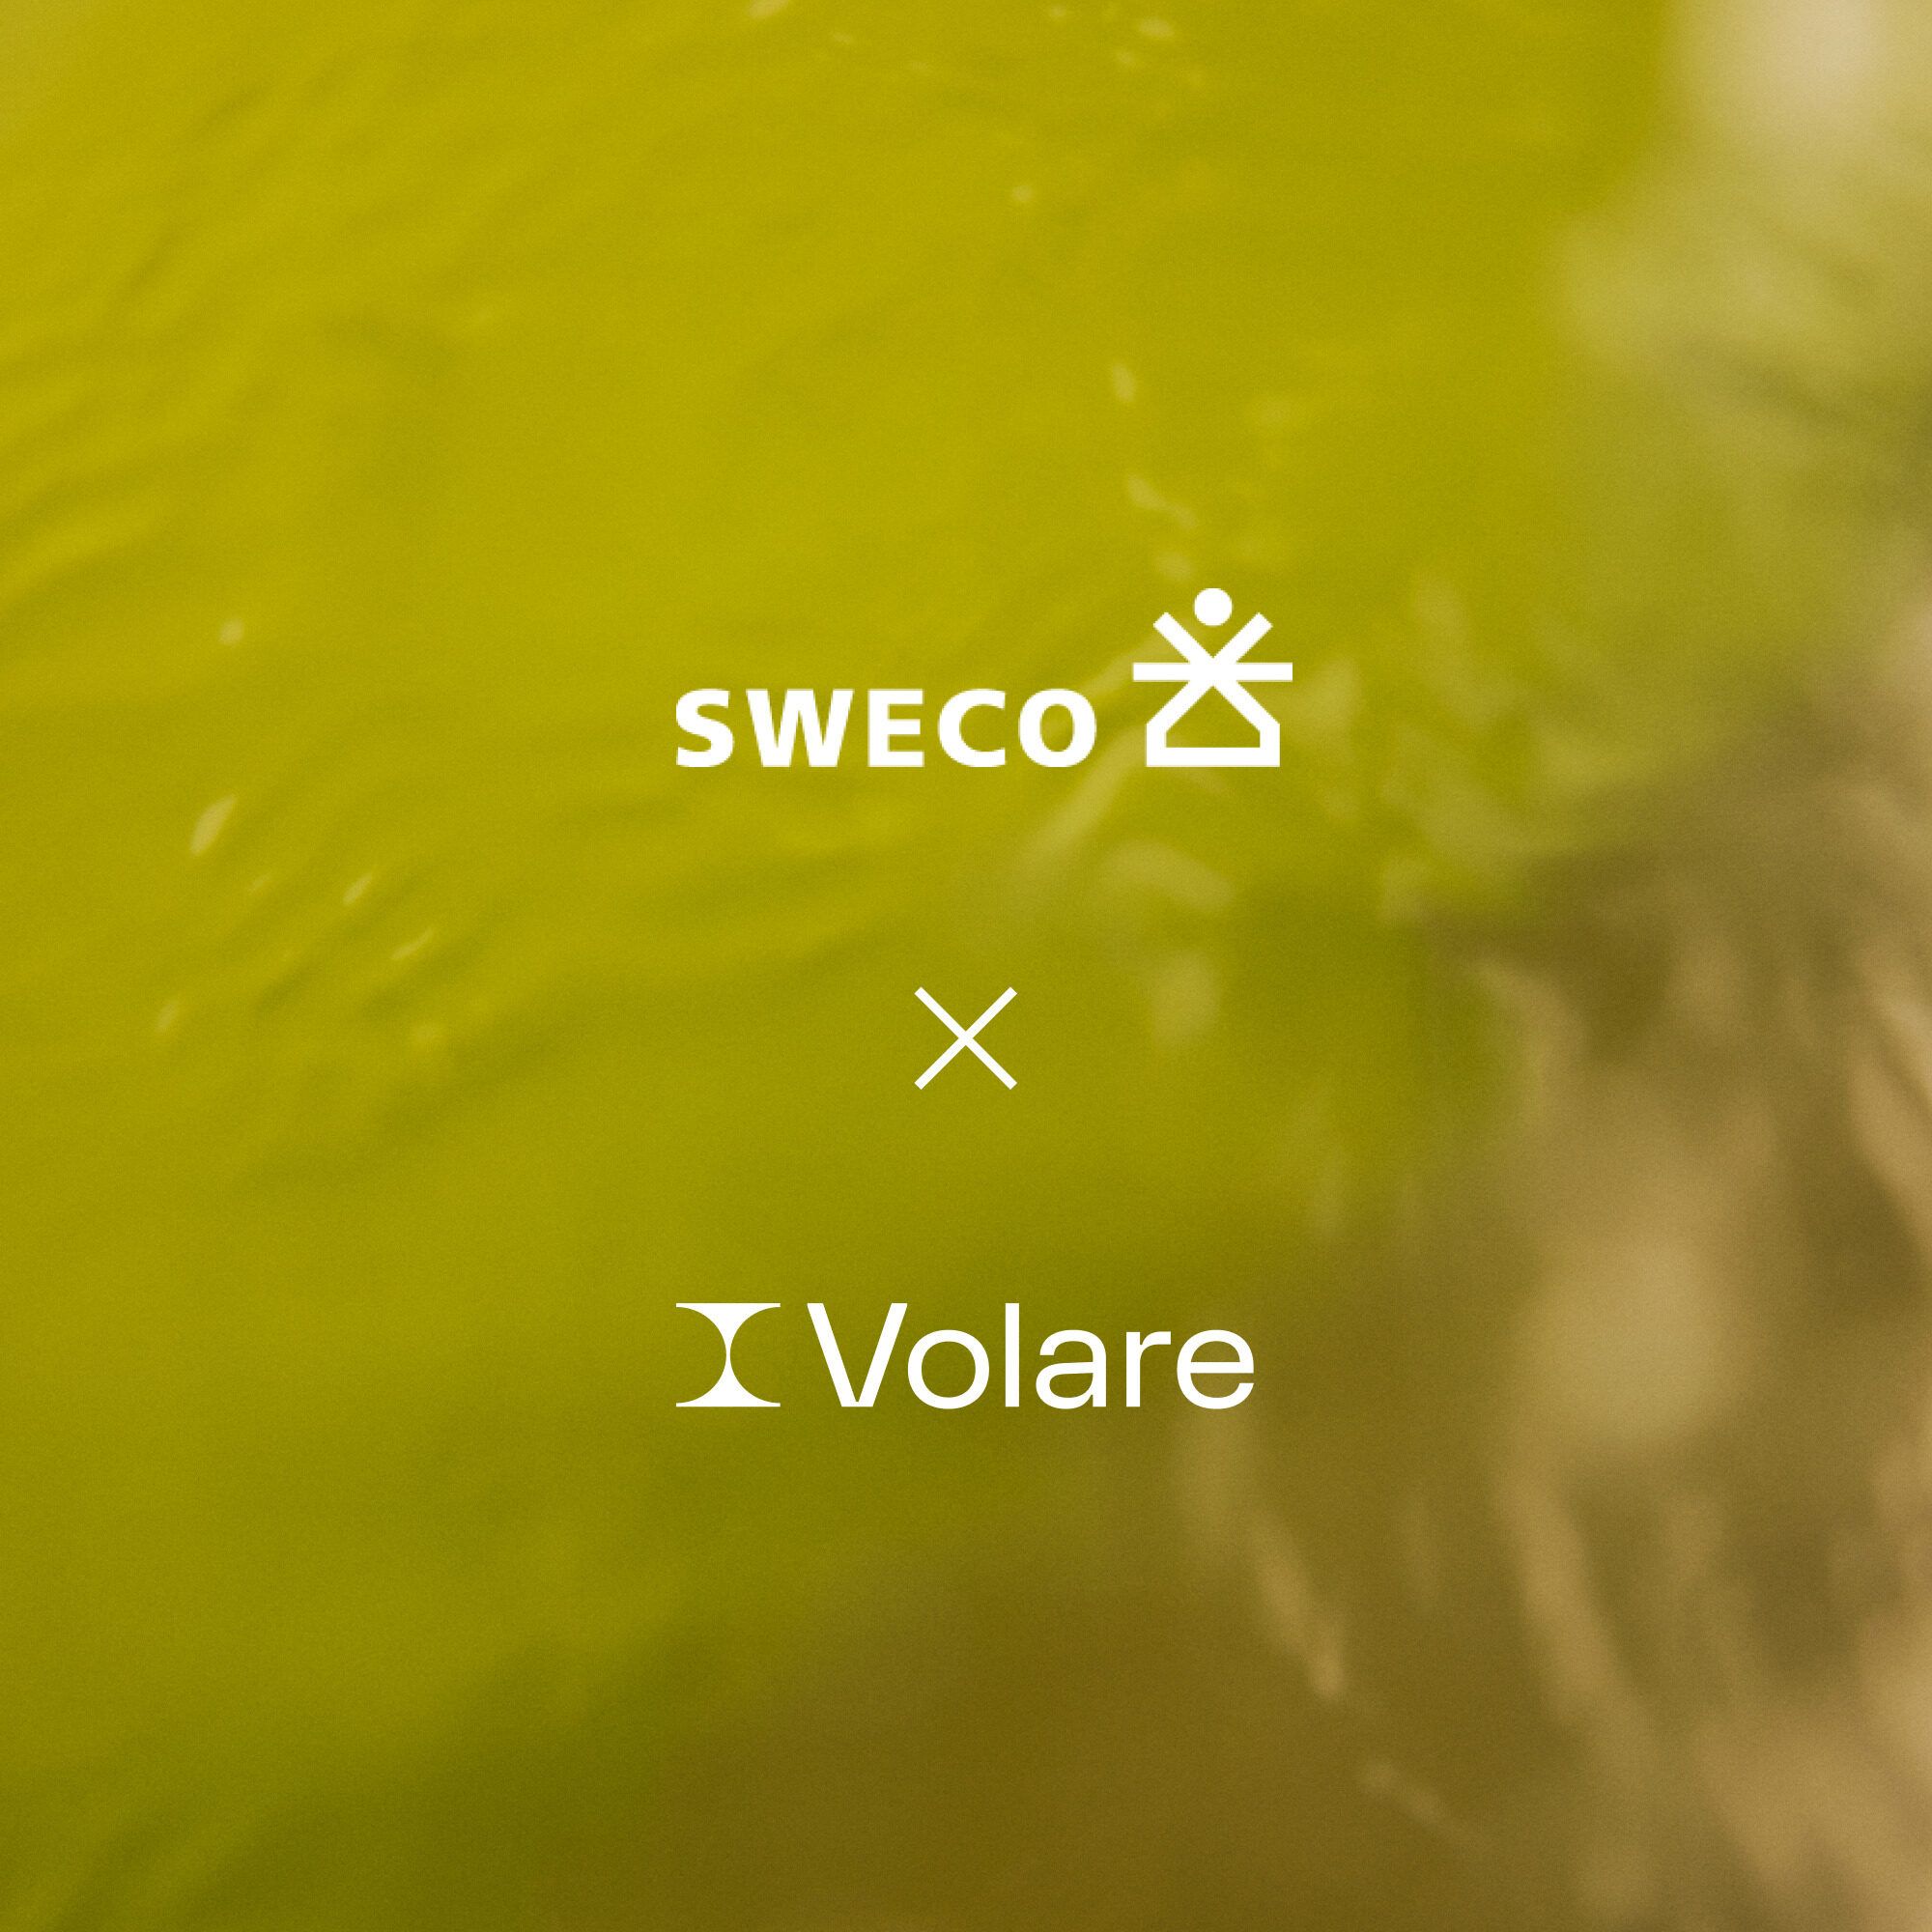 Volare and Sweco logos